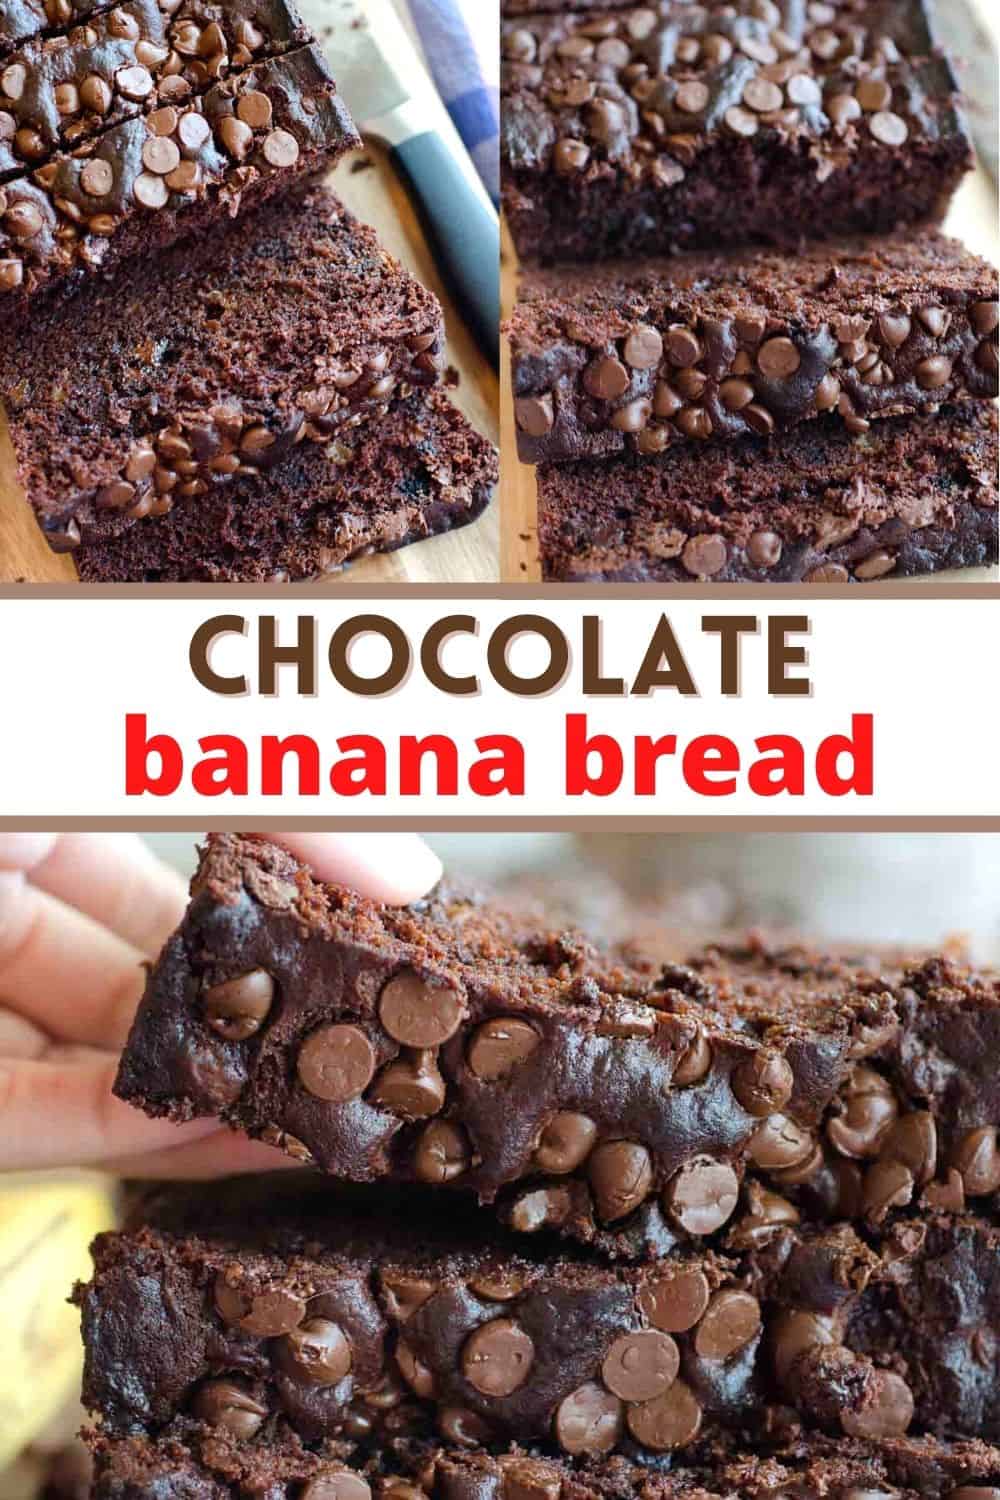 This chocolate banana bread is super moist yet sturdy. Loaded with chocolate chips, this recipe is the chocolate lover's dream!